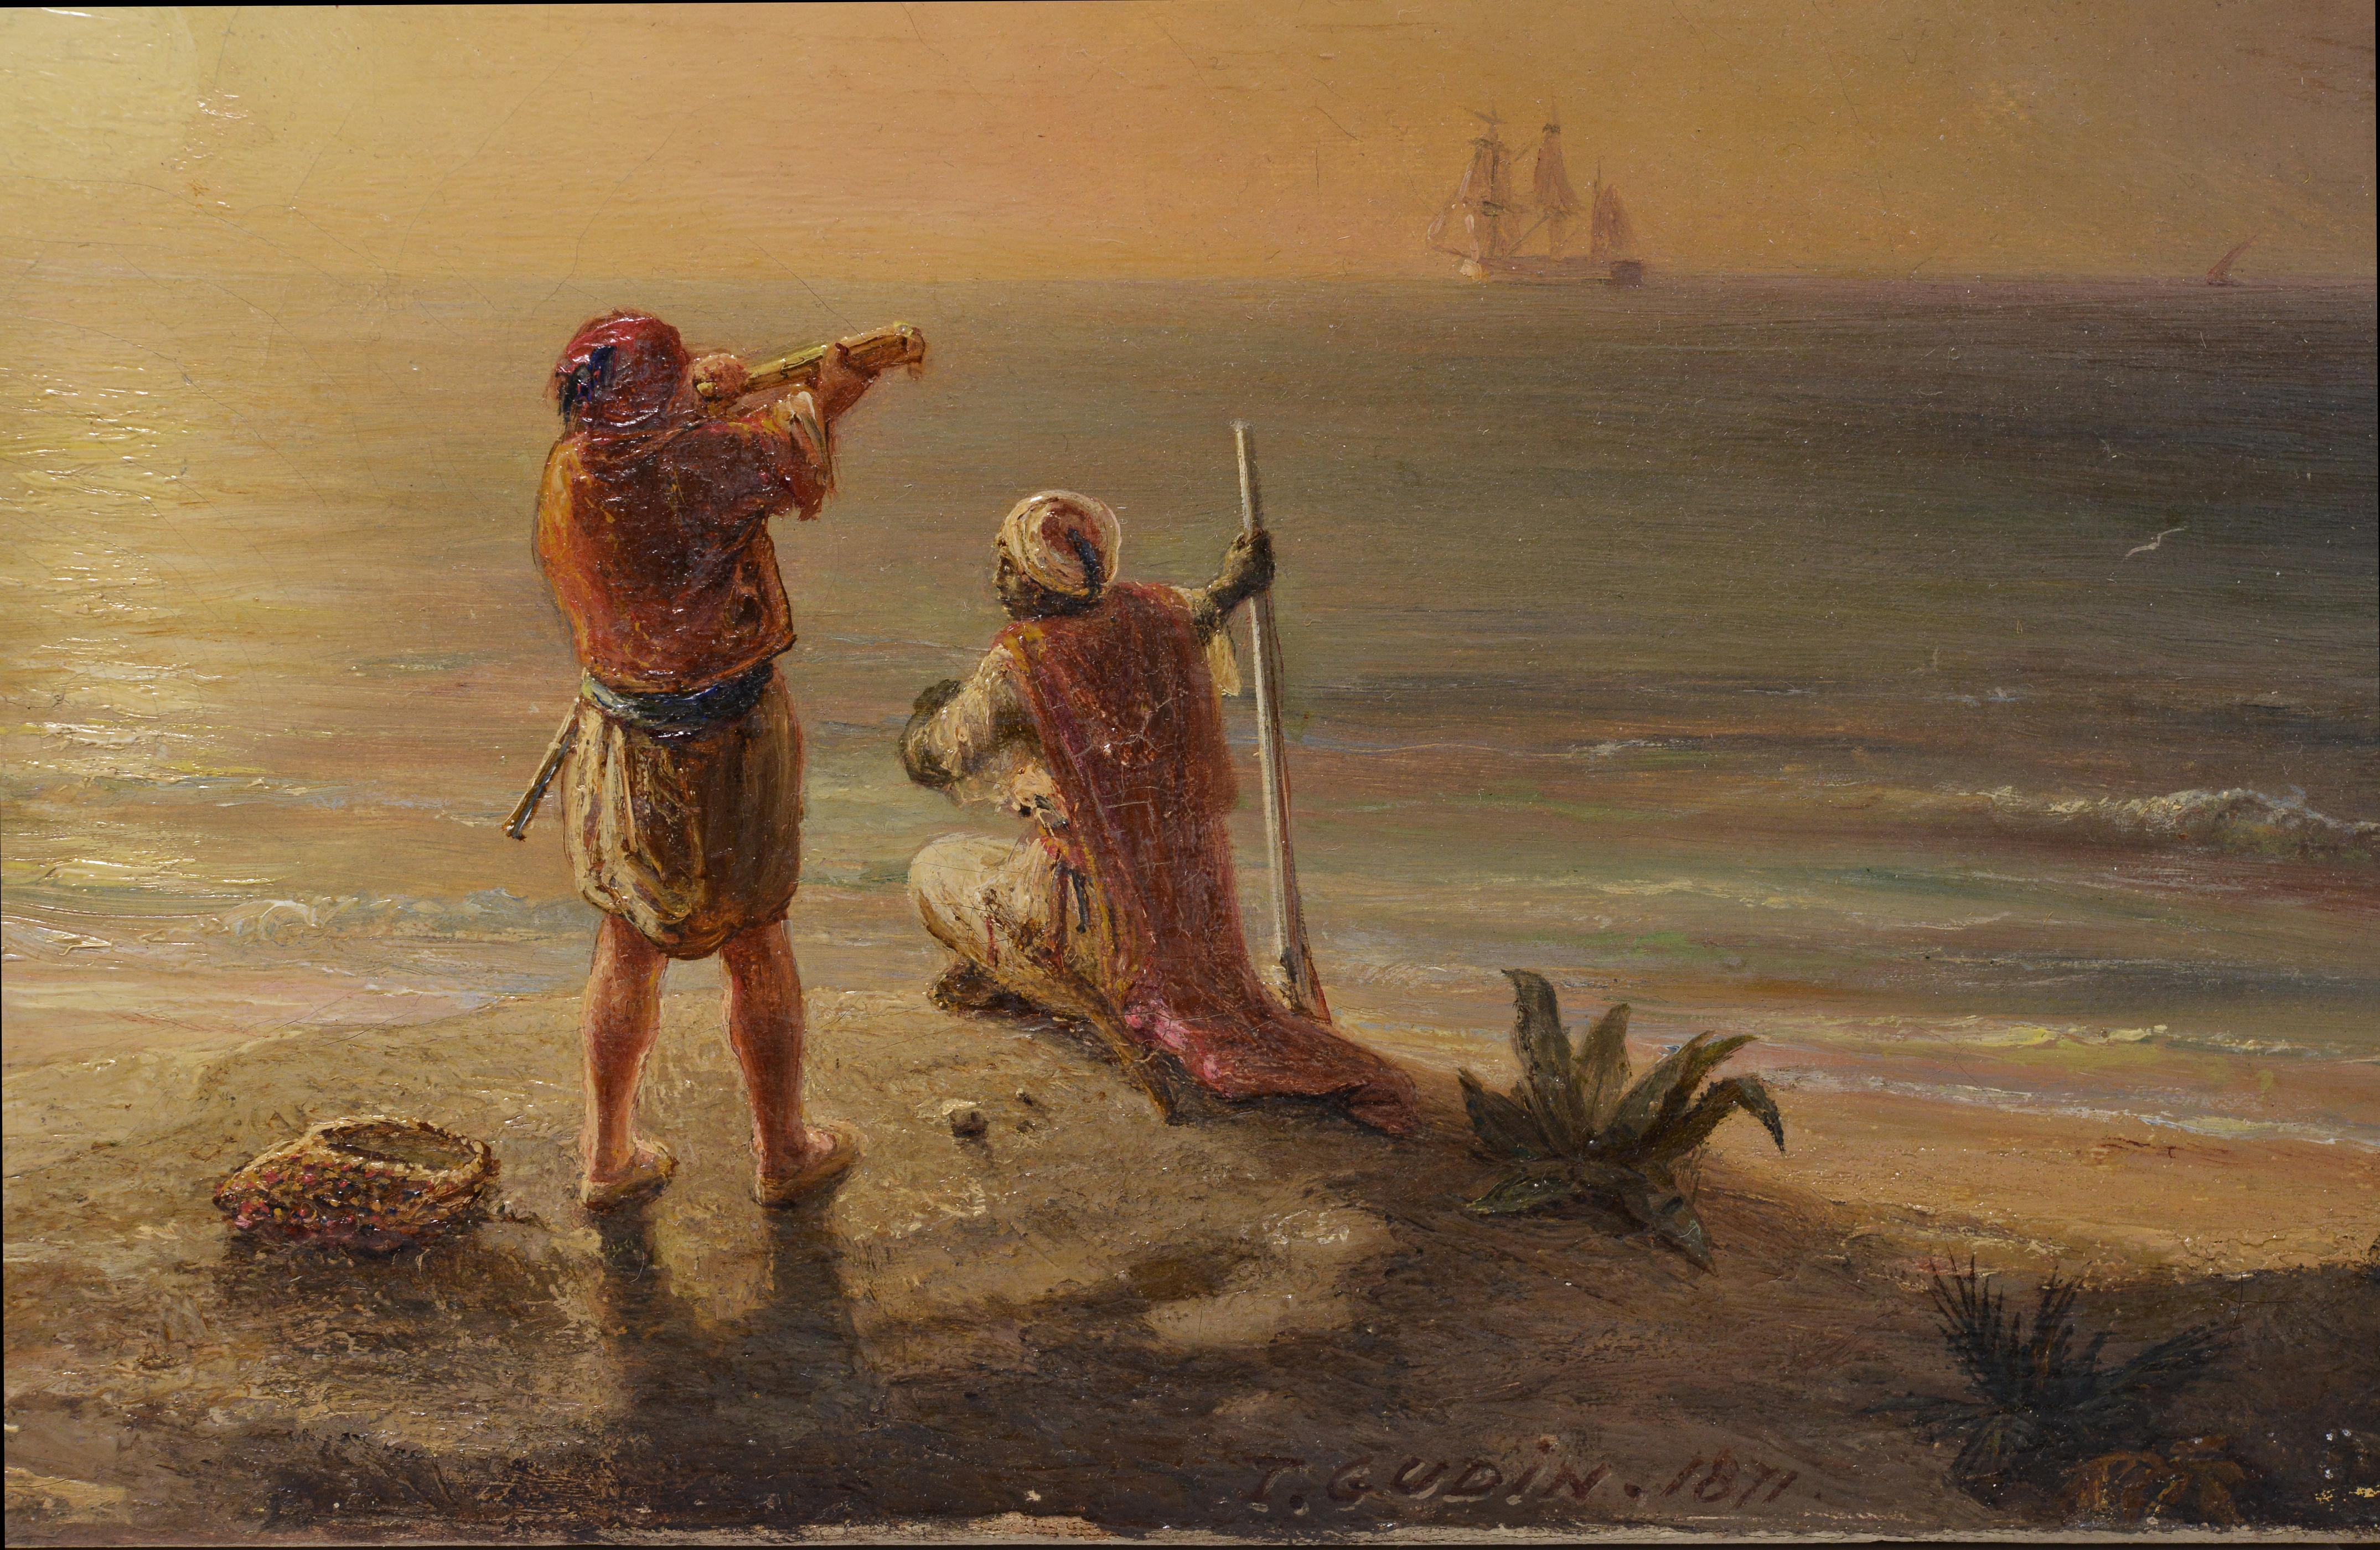 Smugglers at Algerian Coast 1871 Sunset Marine Scene Oil Painting by T. Gudin For Sale 1